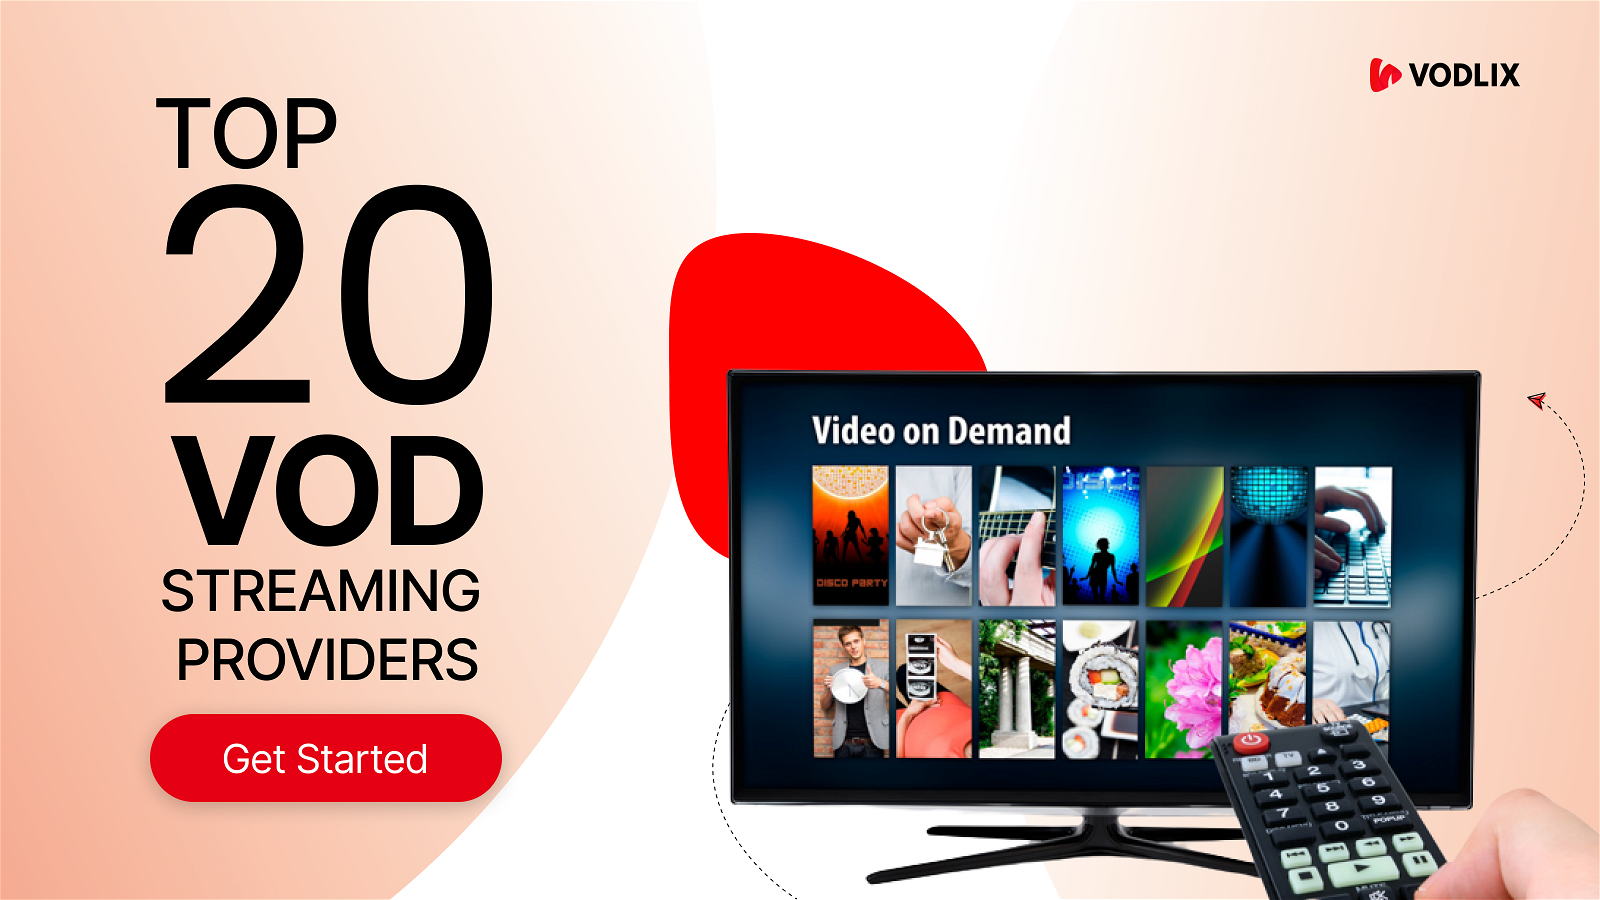 Top 20 VOD Streaming Providers